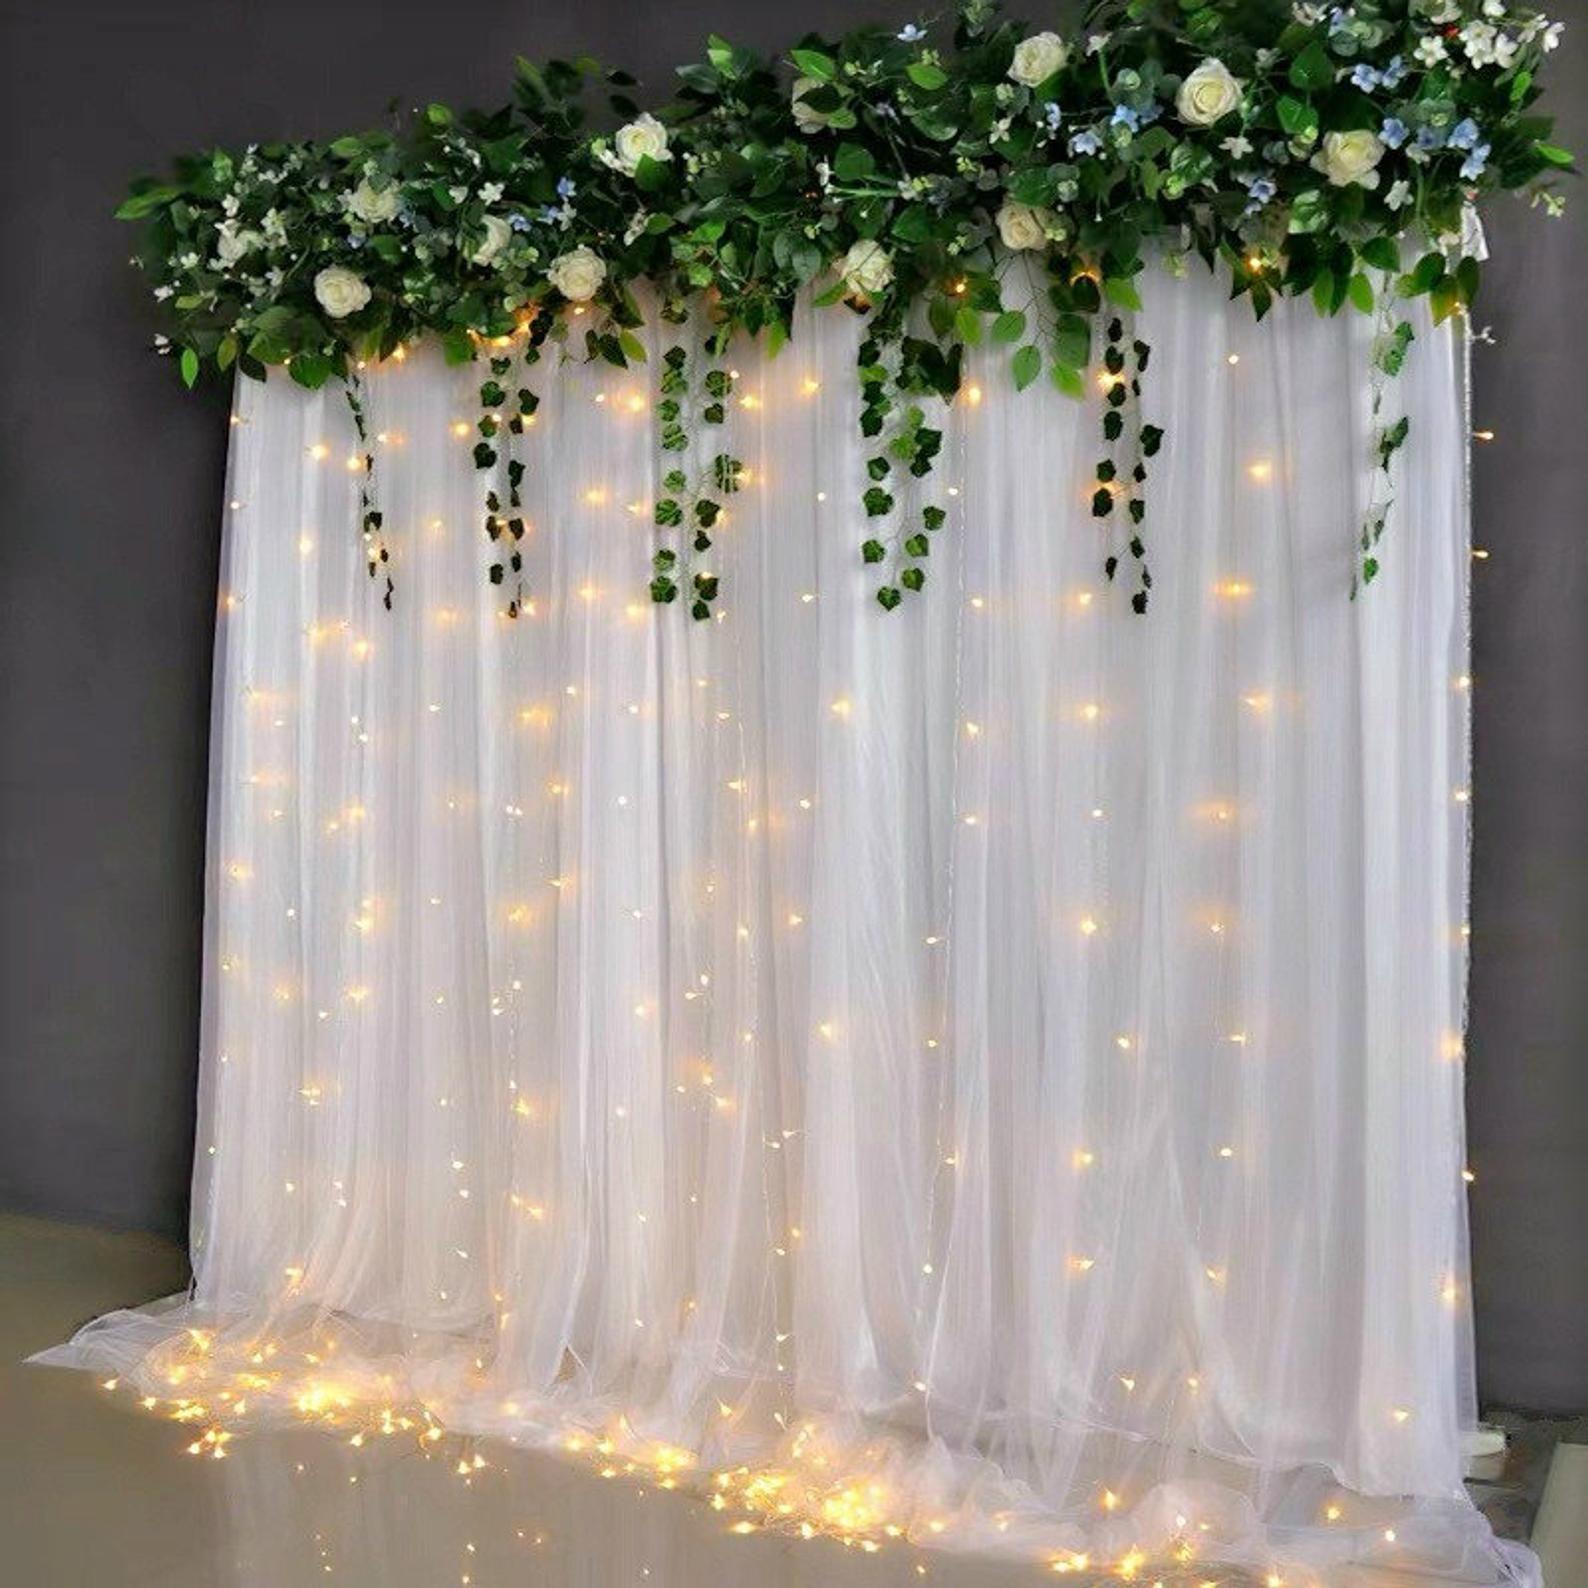 8 Lighting Modes for Bedroom Wedding backdrop Indoor Curtain - If you say i do